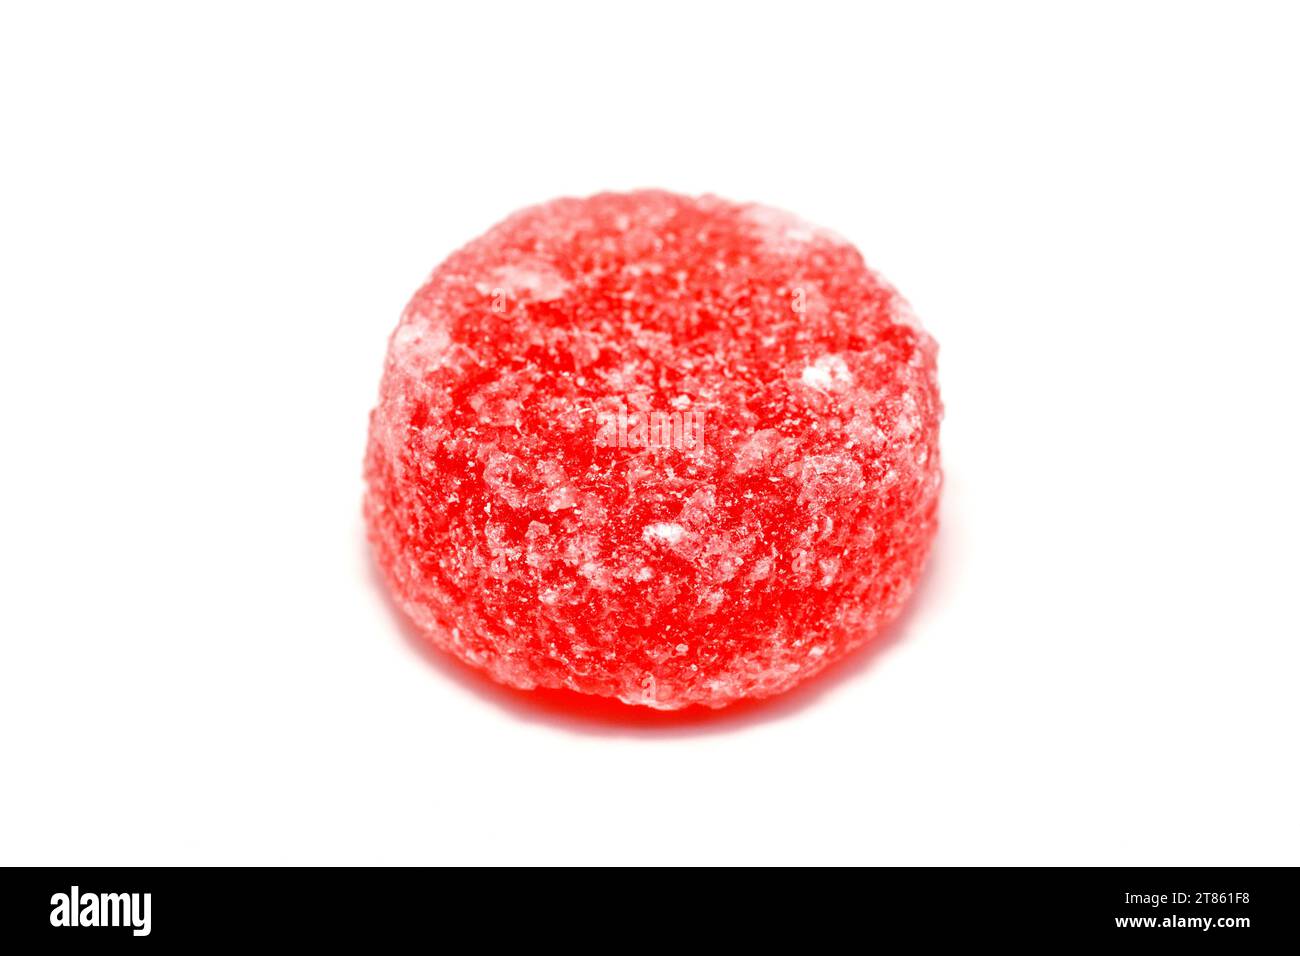 Close up of a red fruit pastille sweet, isolated against a white background. Stock Photo